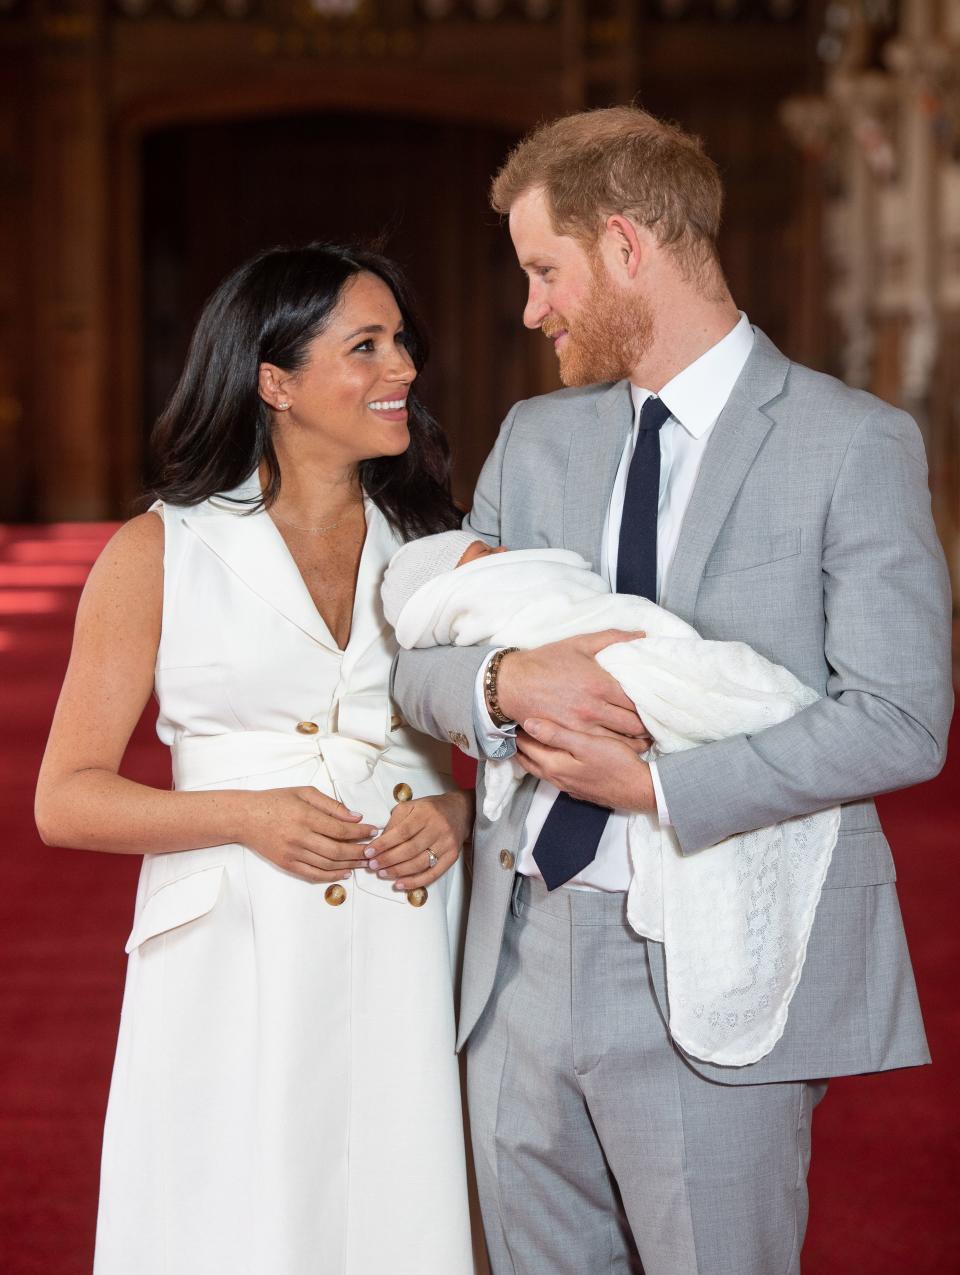 Meghan Markle and husband, Prince Harry share a beautiful smile while he is holding on to their new born baby.